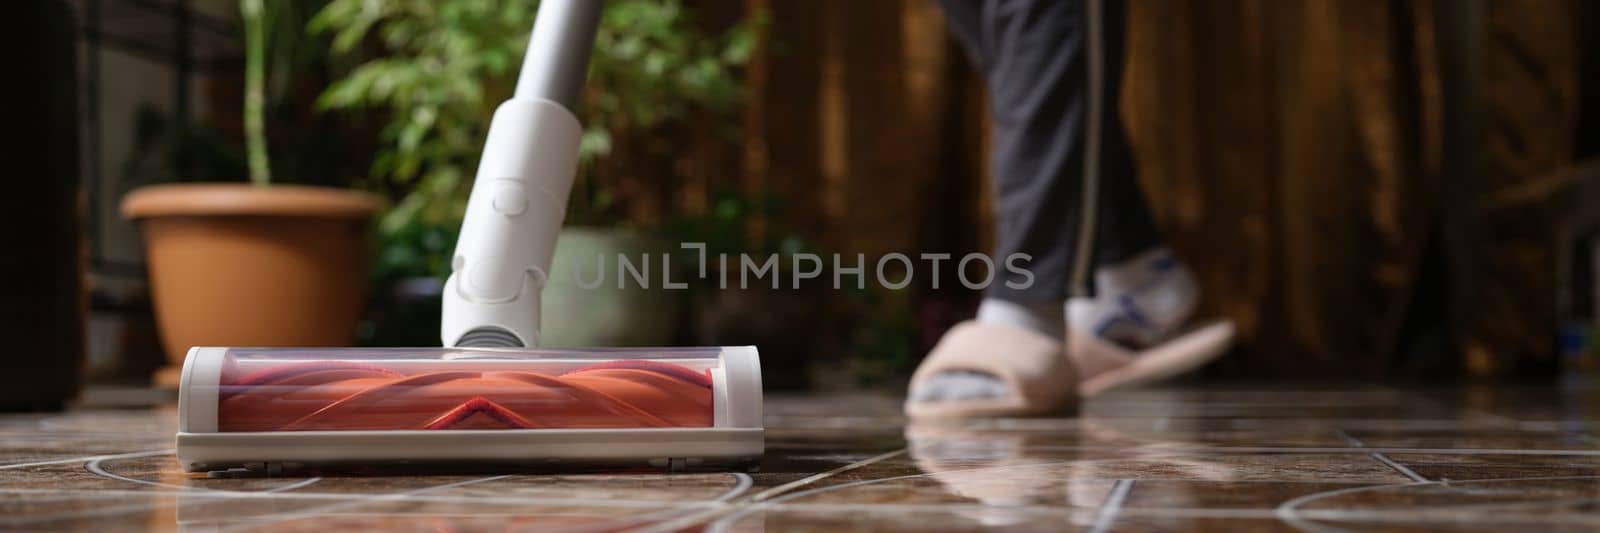 Cordless vacuum cleaner with turbo brush cleans tiles in living room. Modern home cleaning technology concept